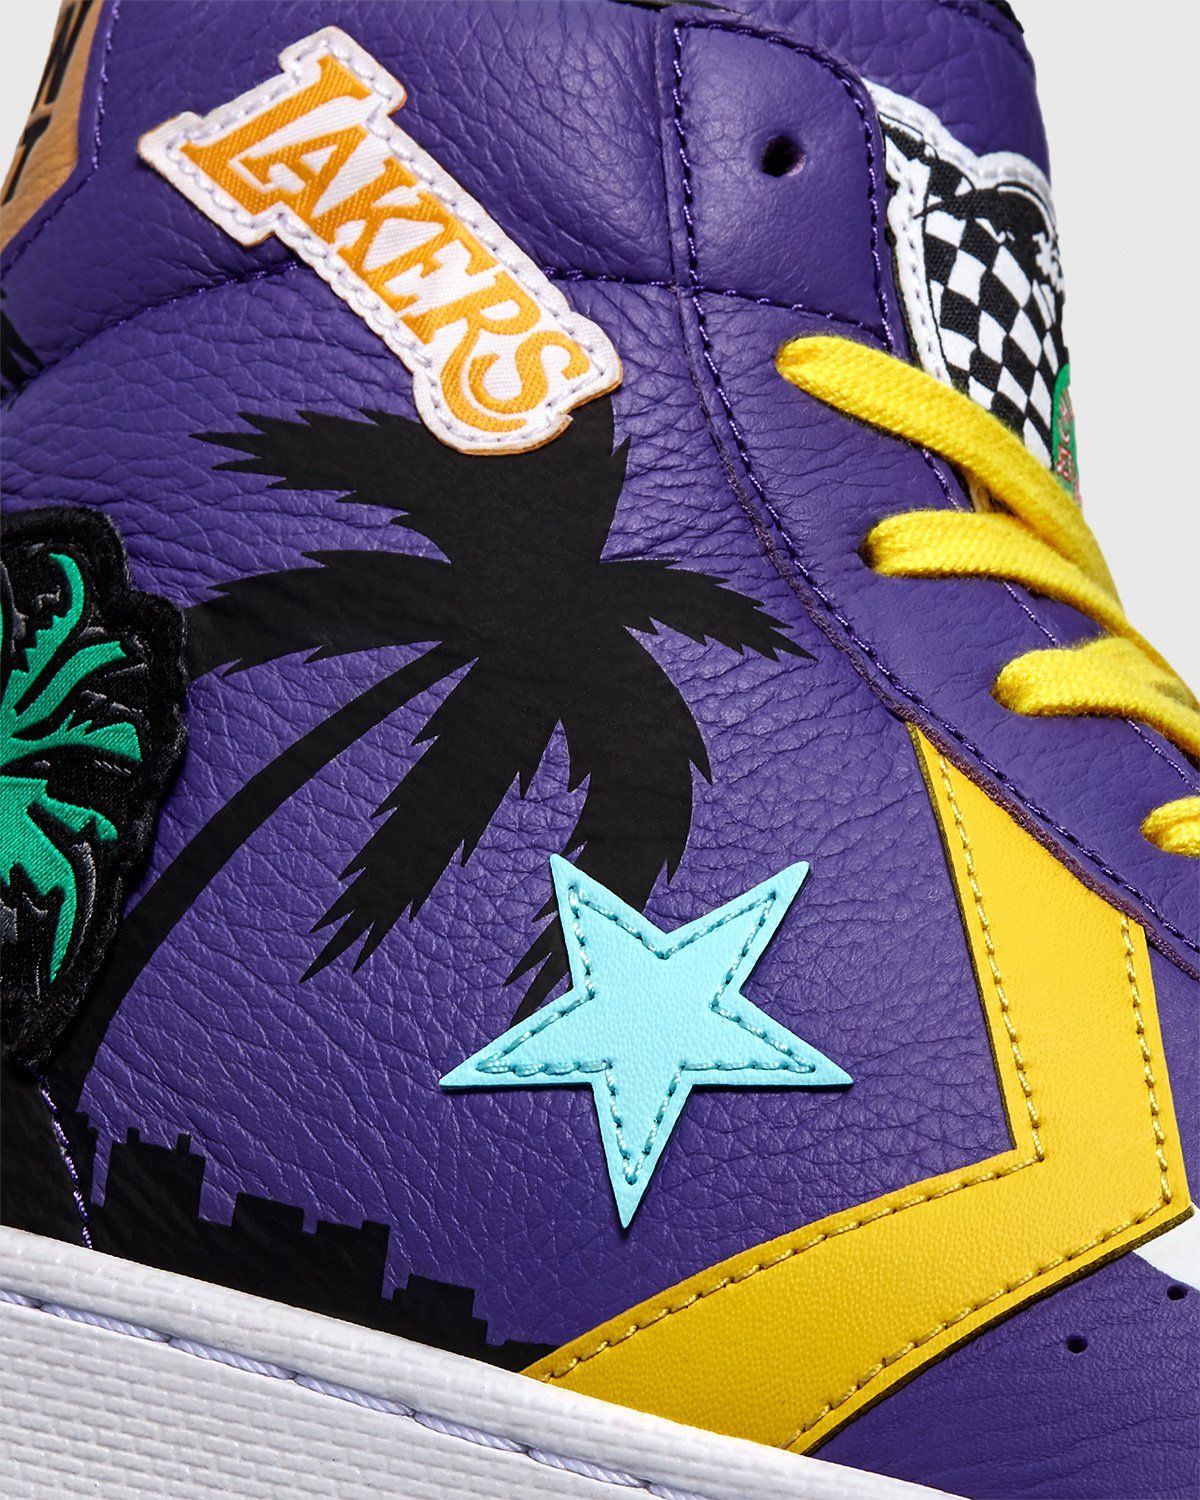 Converse x Jeff Hamilton – Pro Leather High Violet/Poolside - High Top Sneakers - Purple - Image 8